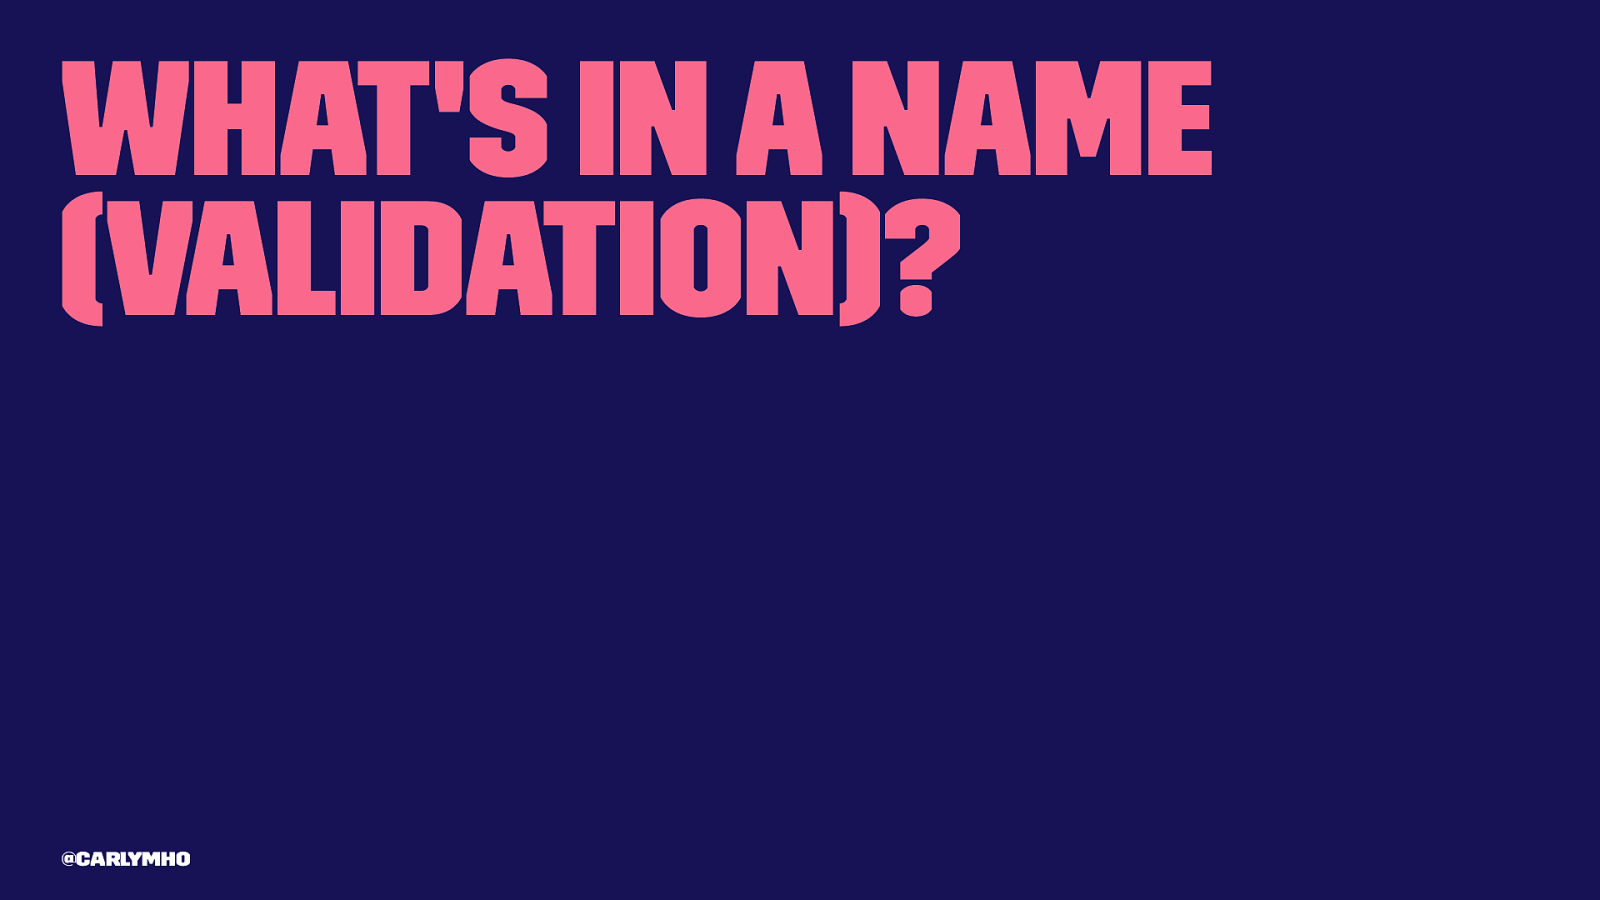 What’s in a name (validation)?